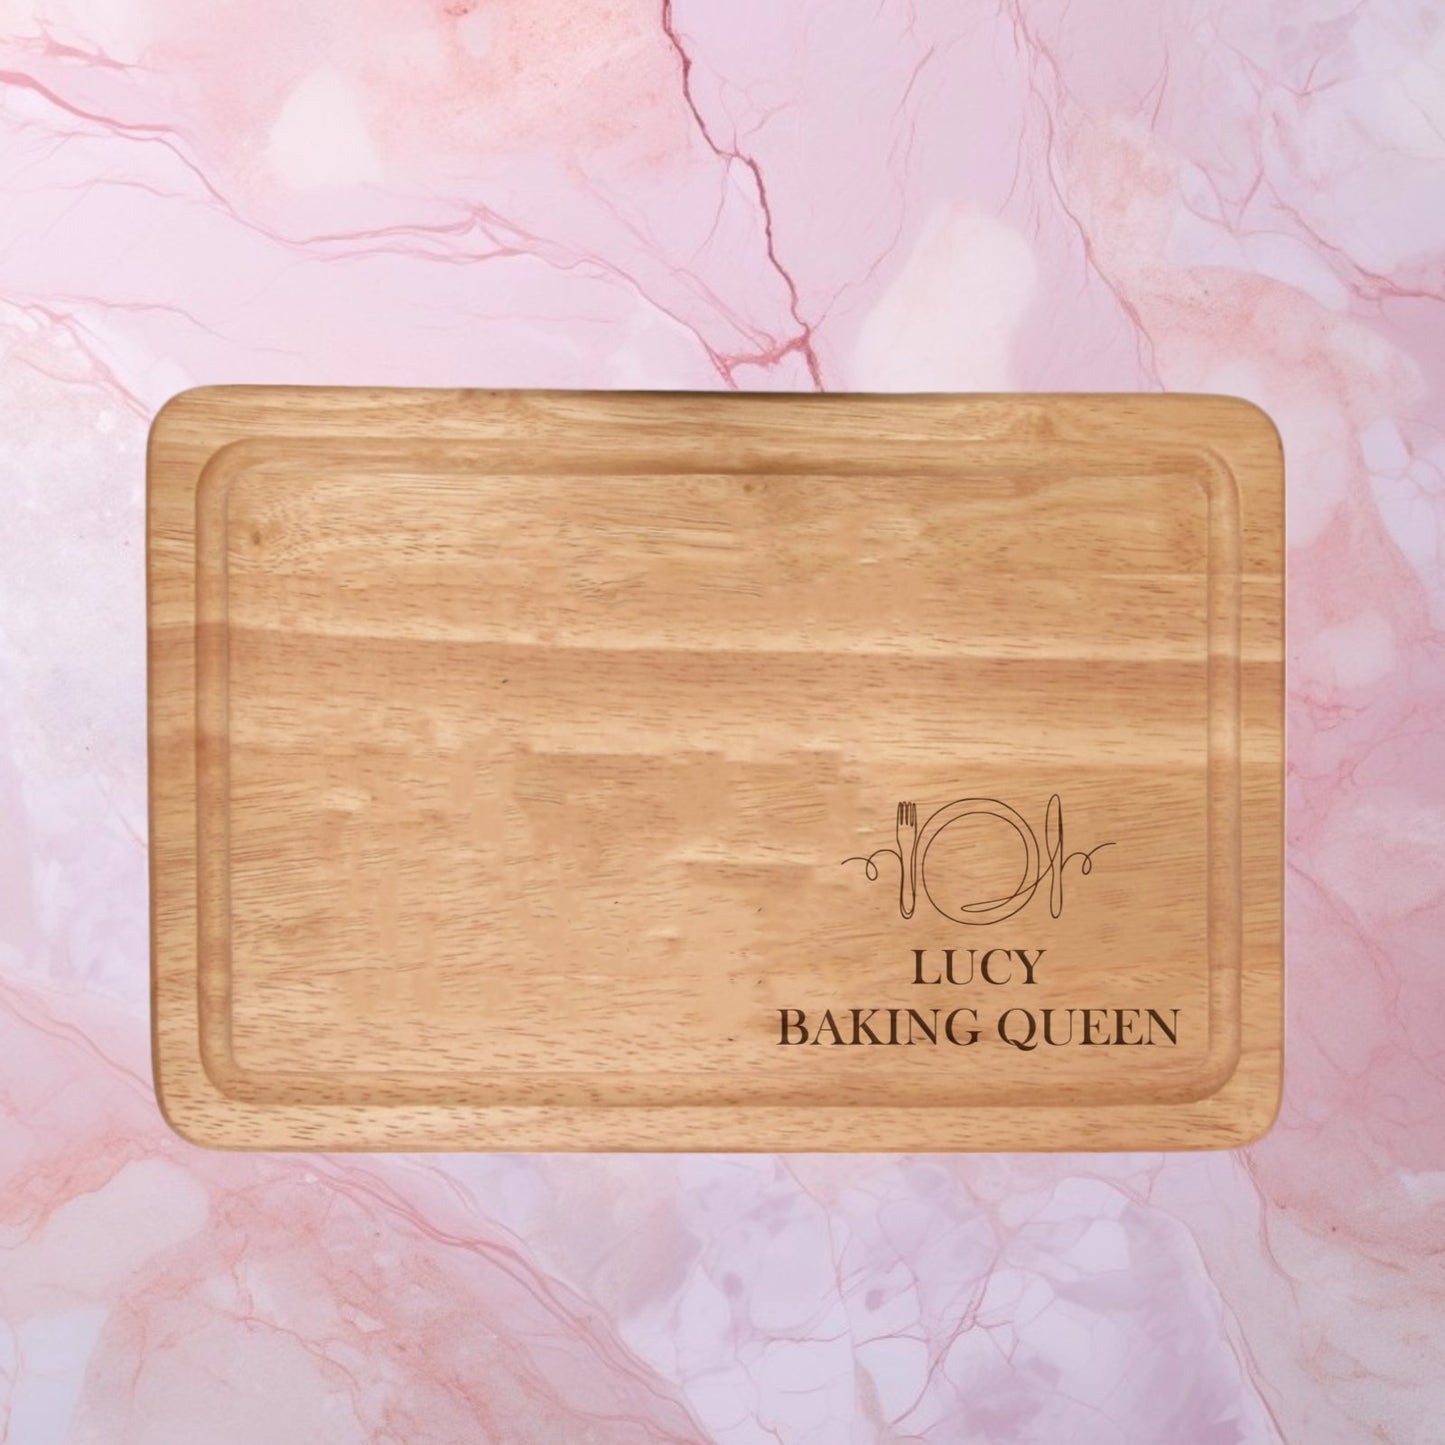 Discover premium quality on Shopify with our 300x200mm Personalised Chopping Board. Ideal for gifts, weddings, or anniversaries. Customise with 2 lines (20 characters each) for a unique touch.